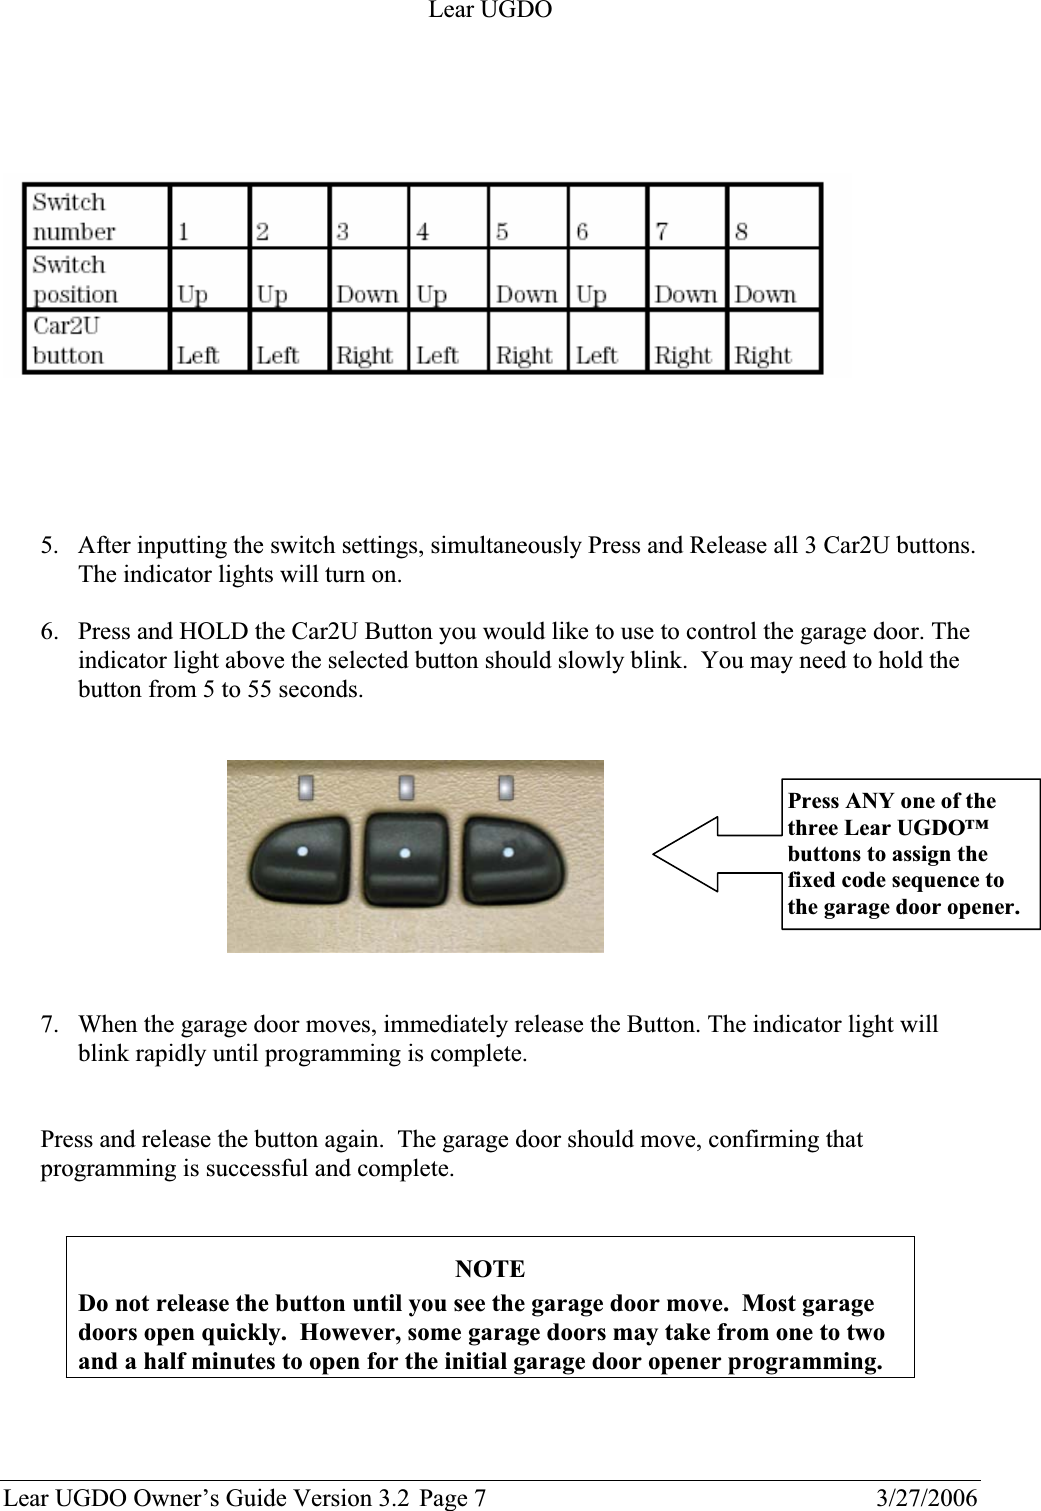 Lear UGDO Lear UGDO Owner’s Guide Version 3.2  Page 7  3/27/2006 5. After inputting the switch settings, simultaneously Press and Release all 3 Car2U buttons. The indicator lights will turn on. 6. Press and HOLD the Car2U Button you would like to use to control the garage door. The indicator light above the selected button should slowly blink.  You may need to hold the button from 5 to 55 seconds.  7. When the garage door moves, immediately release the Button. The indicator light will blink rapidly until programming is complete.  Press and release the button again.  The garage door should move, confirming that programming is successful and complete.   NOTEDo not release the button until you see the garage door move.  Most garage doors open quickly.  However, some garage doors may take from one to two and a half minutes to open for the initial garage door opener programming. Press ANY one of the three Lear UGDO™ buttons to assign the fixed code sequence to the garage door opener. 